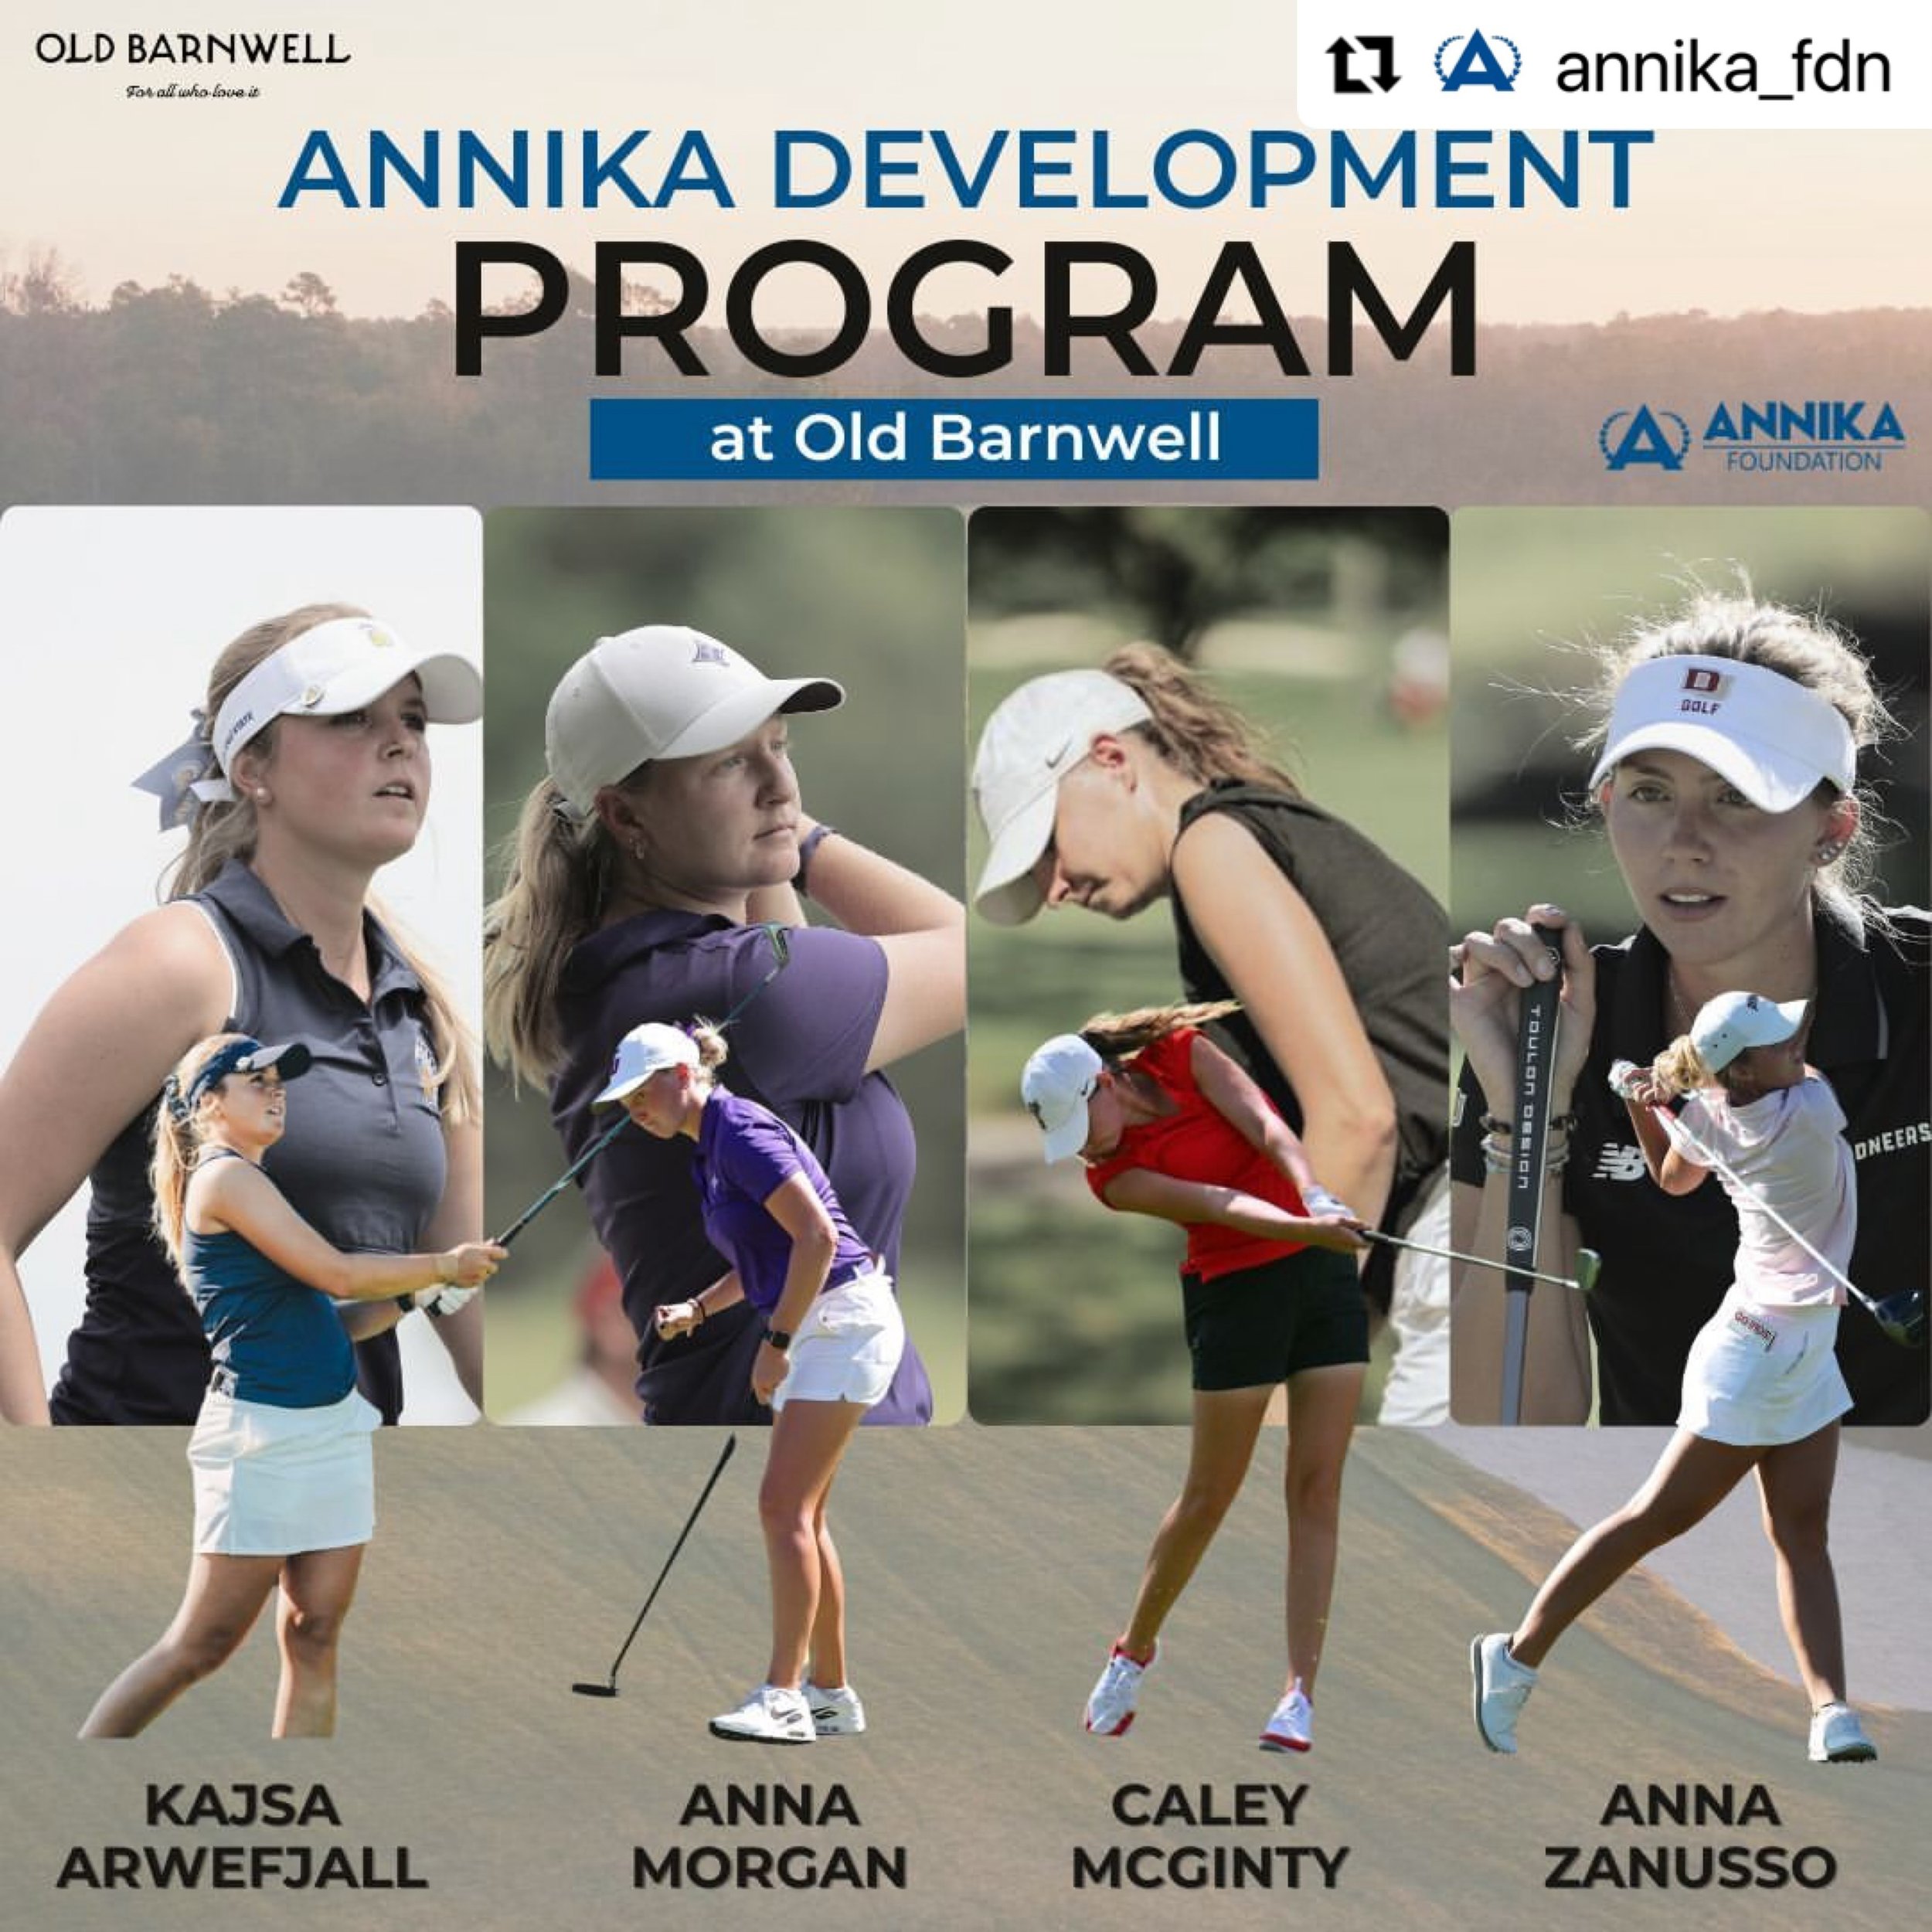 Congratulations to Anna Morgan and Caley McGinty on being selected as 2024 ANNIKA Development Program Ambassadors!
・・・
#Repost @annika_fdn